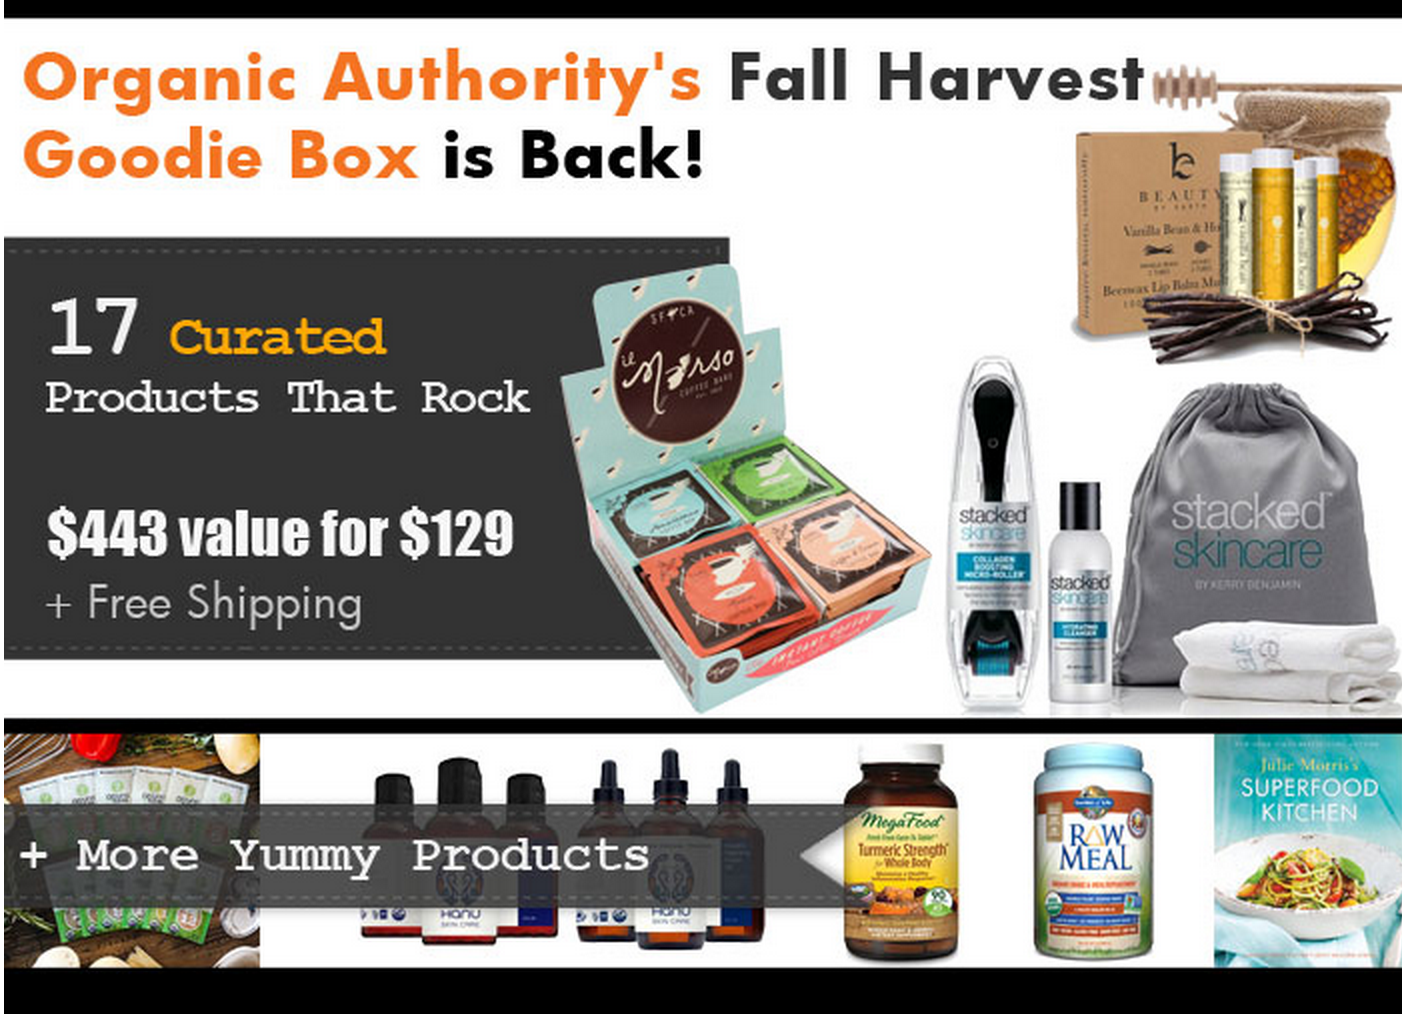 Organic Authority Fall Harvest Goodie Box On Sale Now!